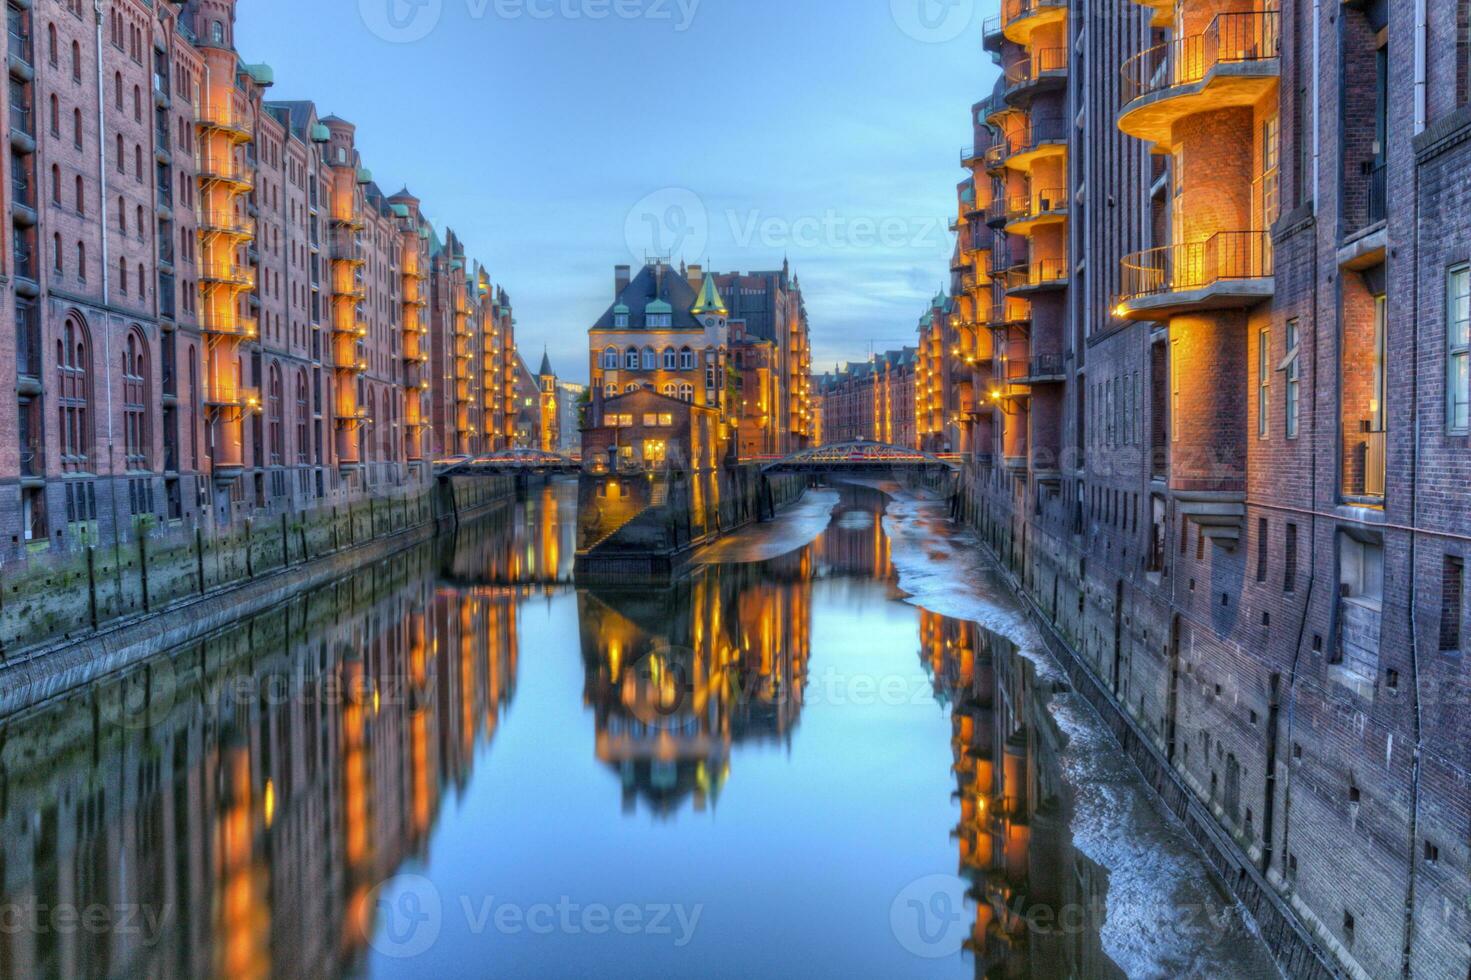 Speicherstadt Warehouses along the Canal, Hamburg, Germany - HDR photo